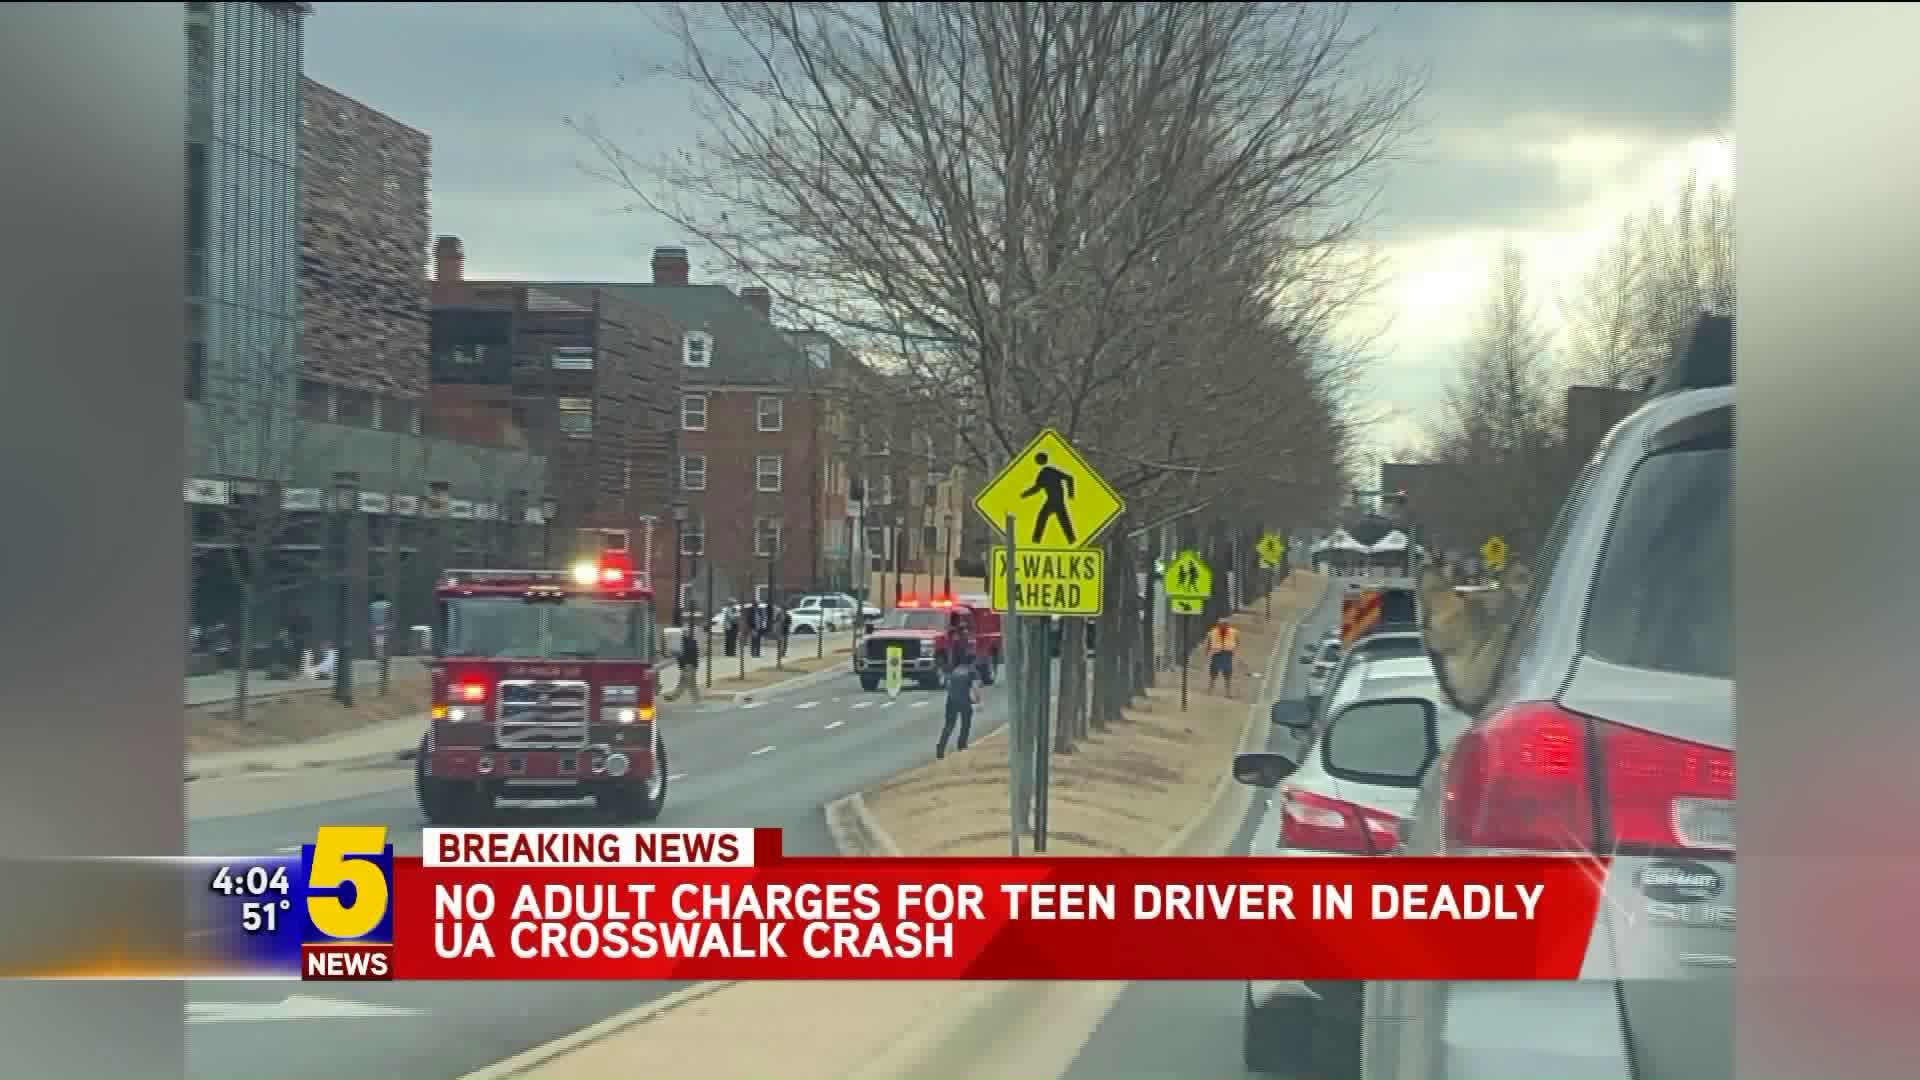 No Adult Charges For Teen Driver In Deadly UA Crosswalk Crash